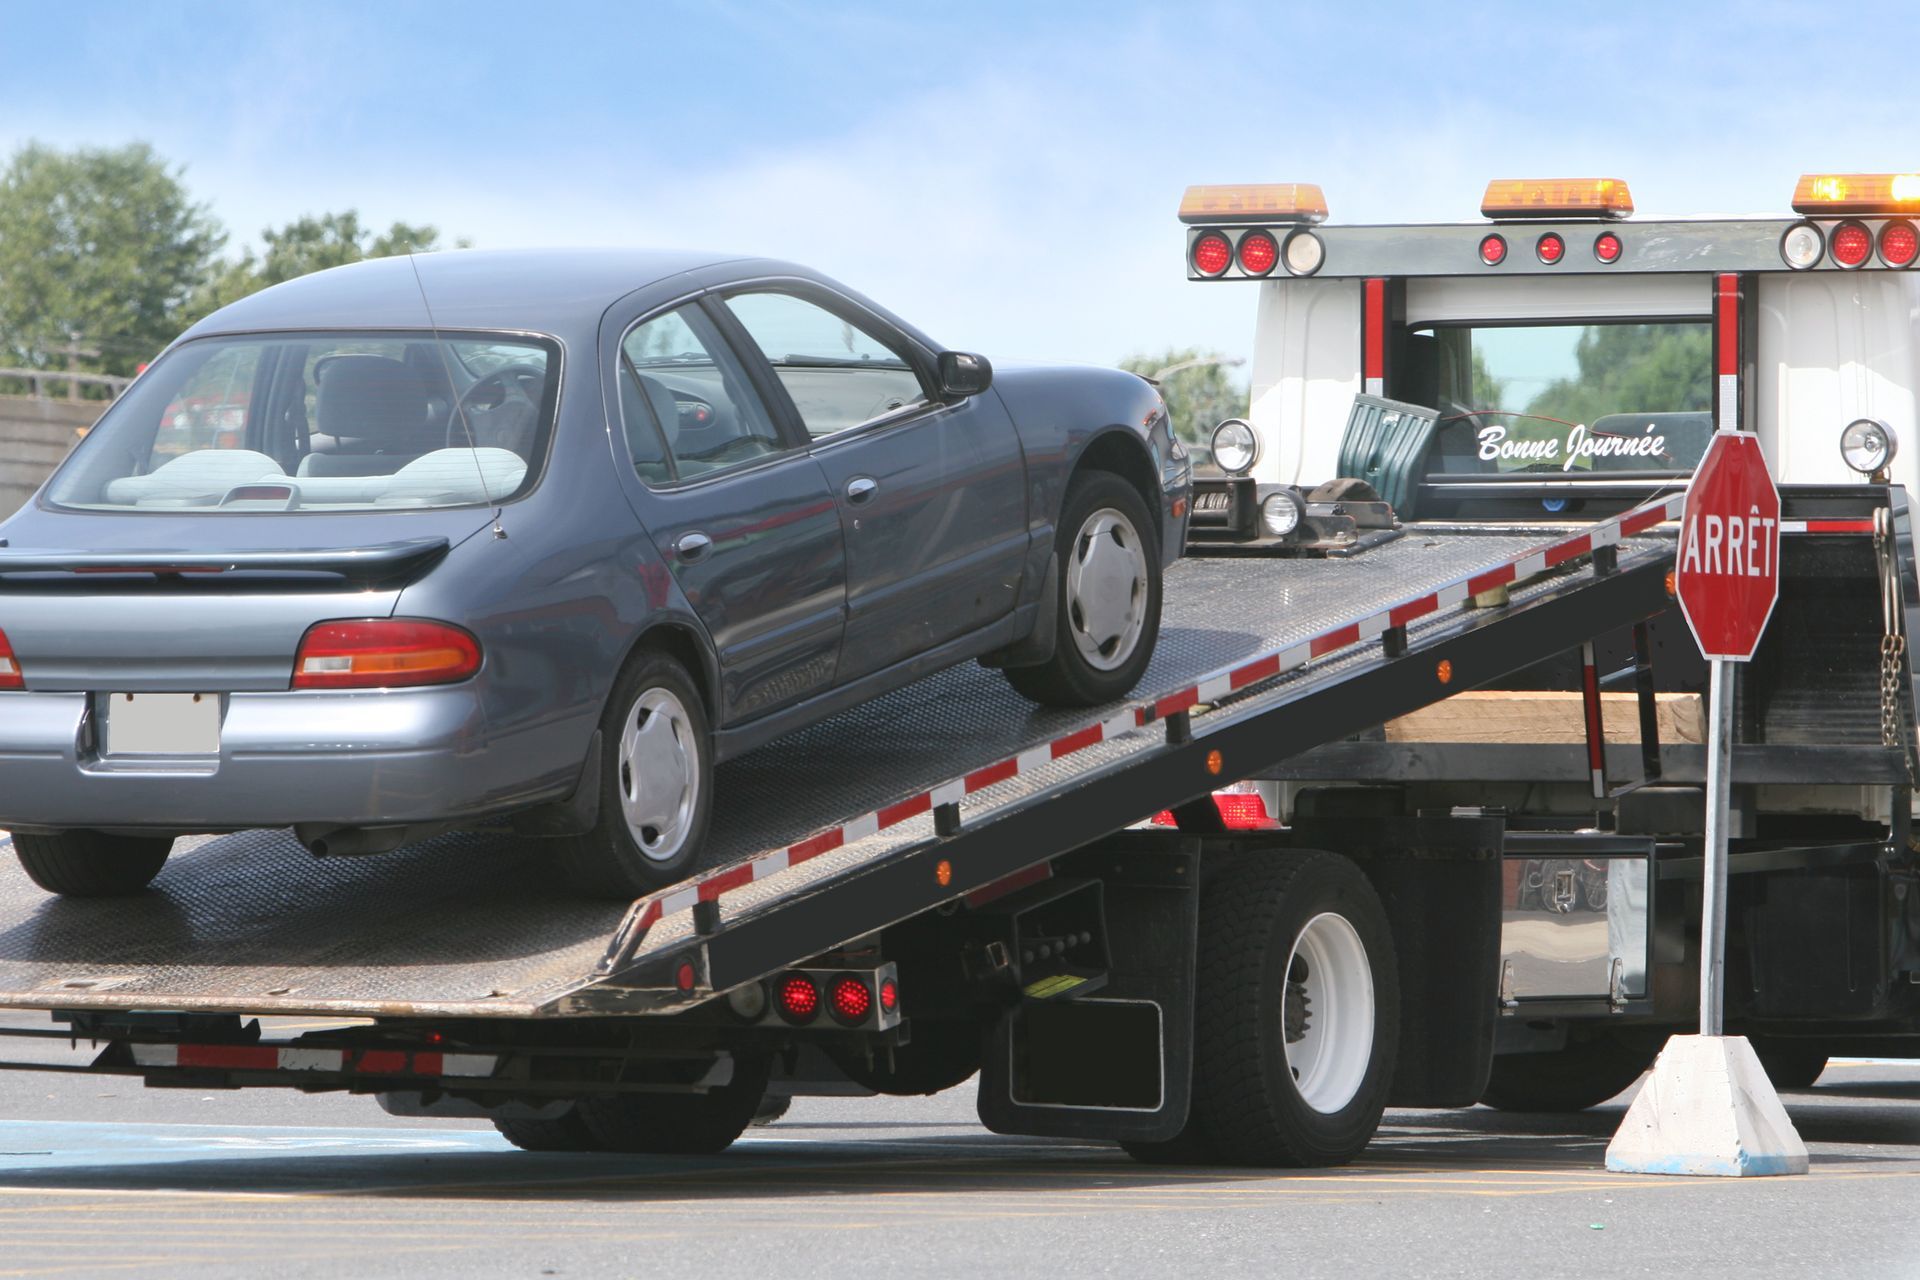 Tow Truck Assisting Dark Grey Car to Move | Lafayette, LA | Paul's Towing & Roadservice